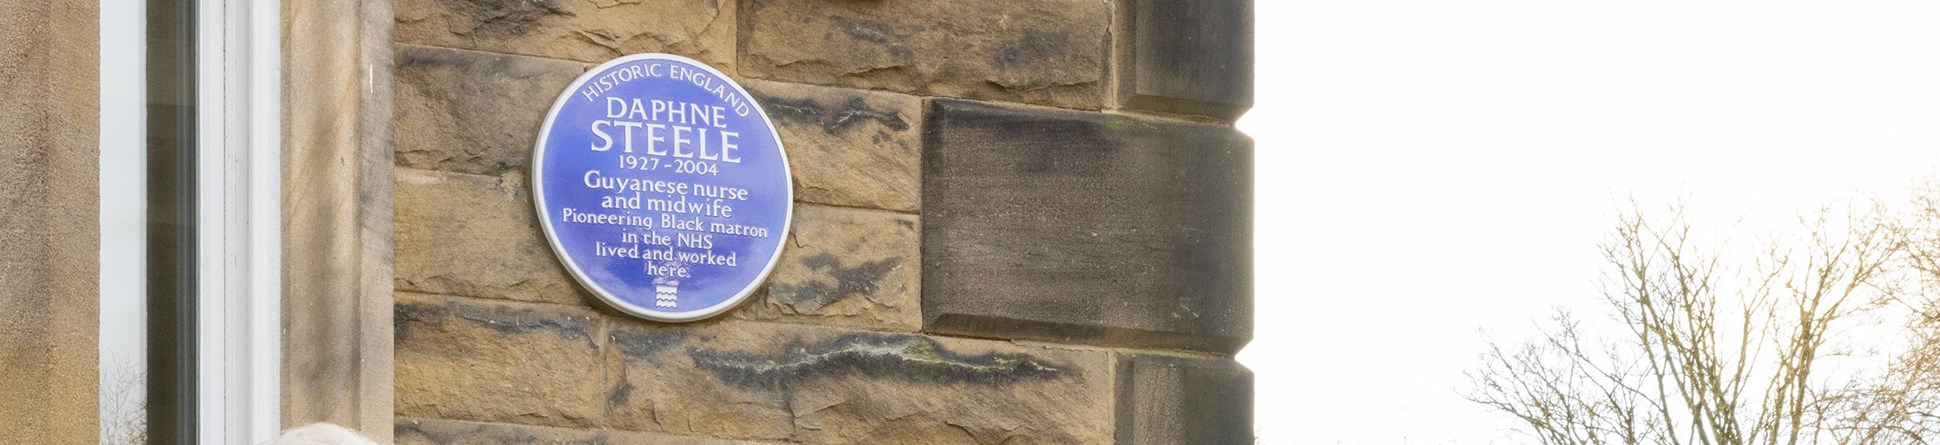 A blue heritage plaque on a brown stone wall